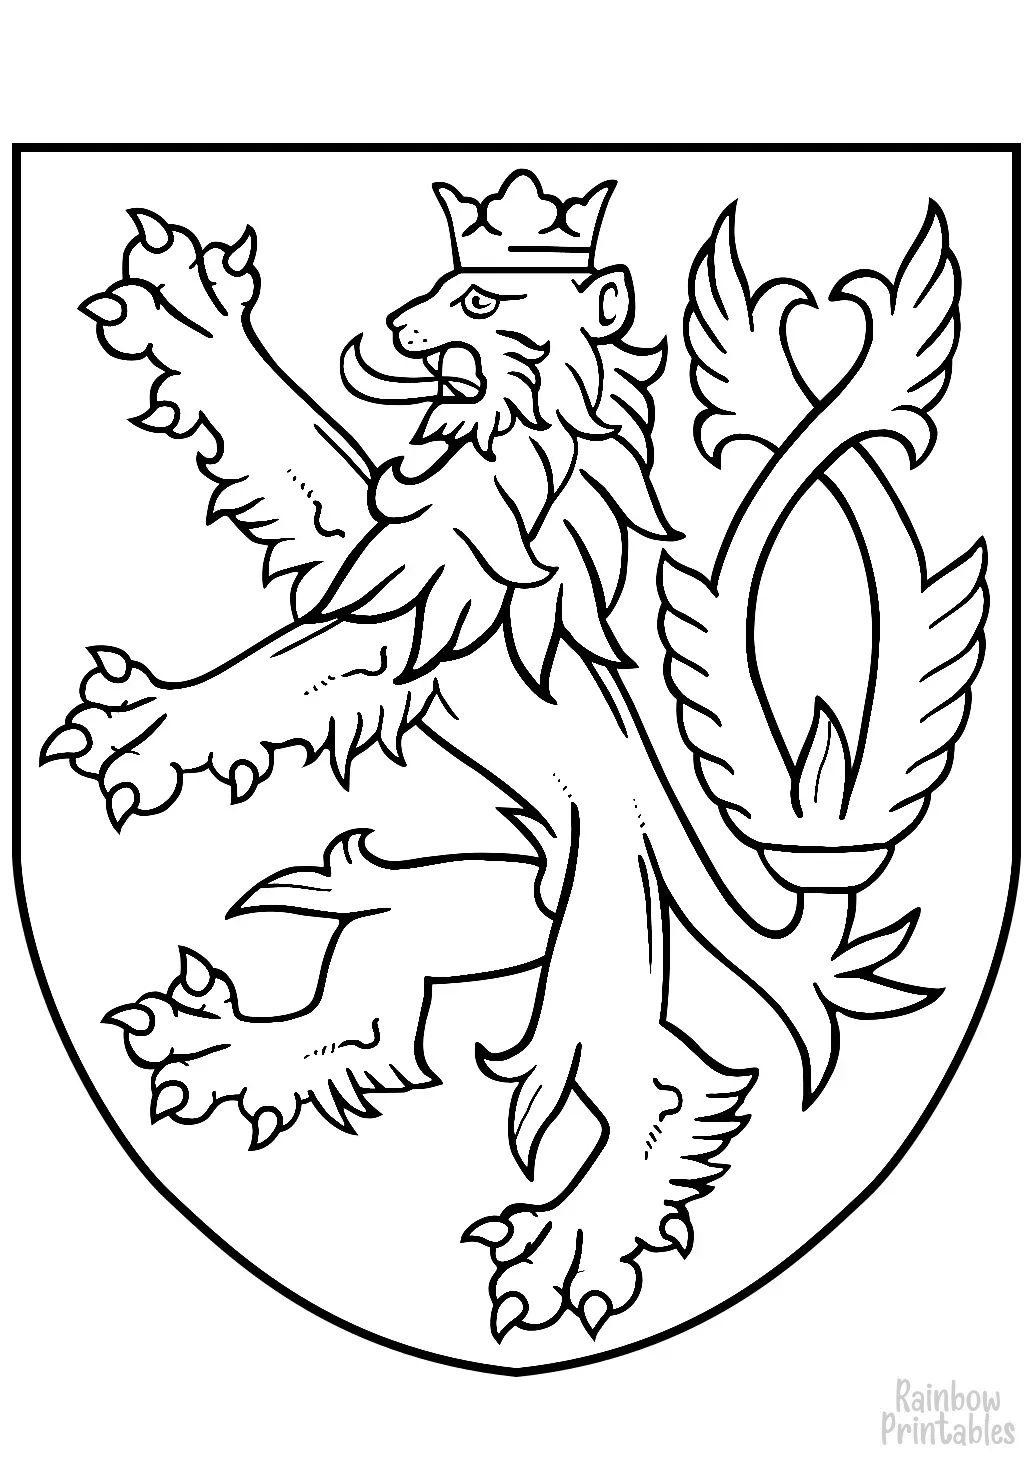 small-coat-of-arms-of-the-czech-republic Free Clipart Coloring Pages for Kids Adults Art Activities Line Art